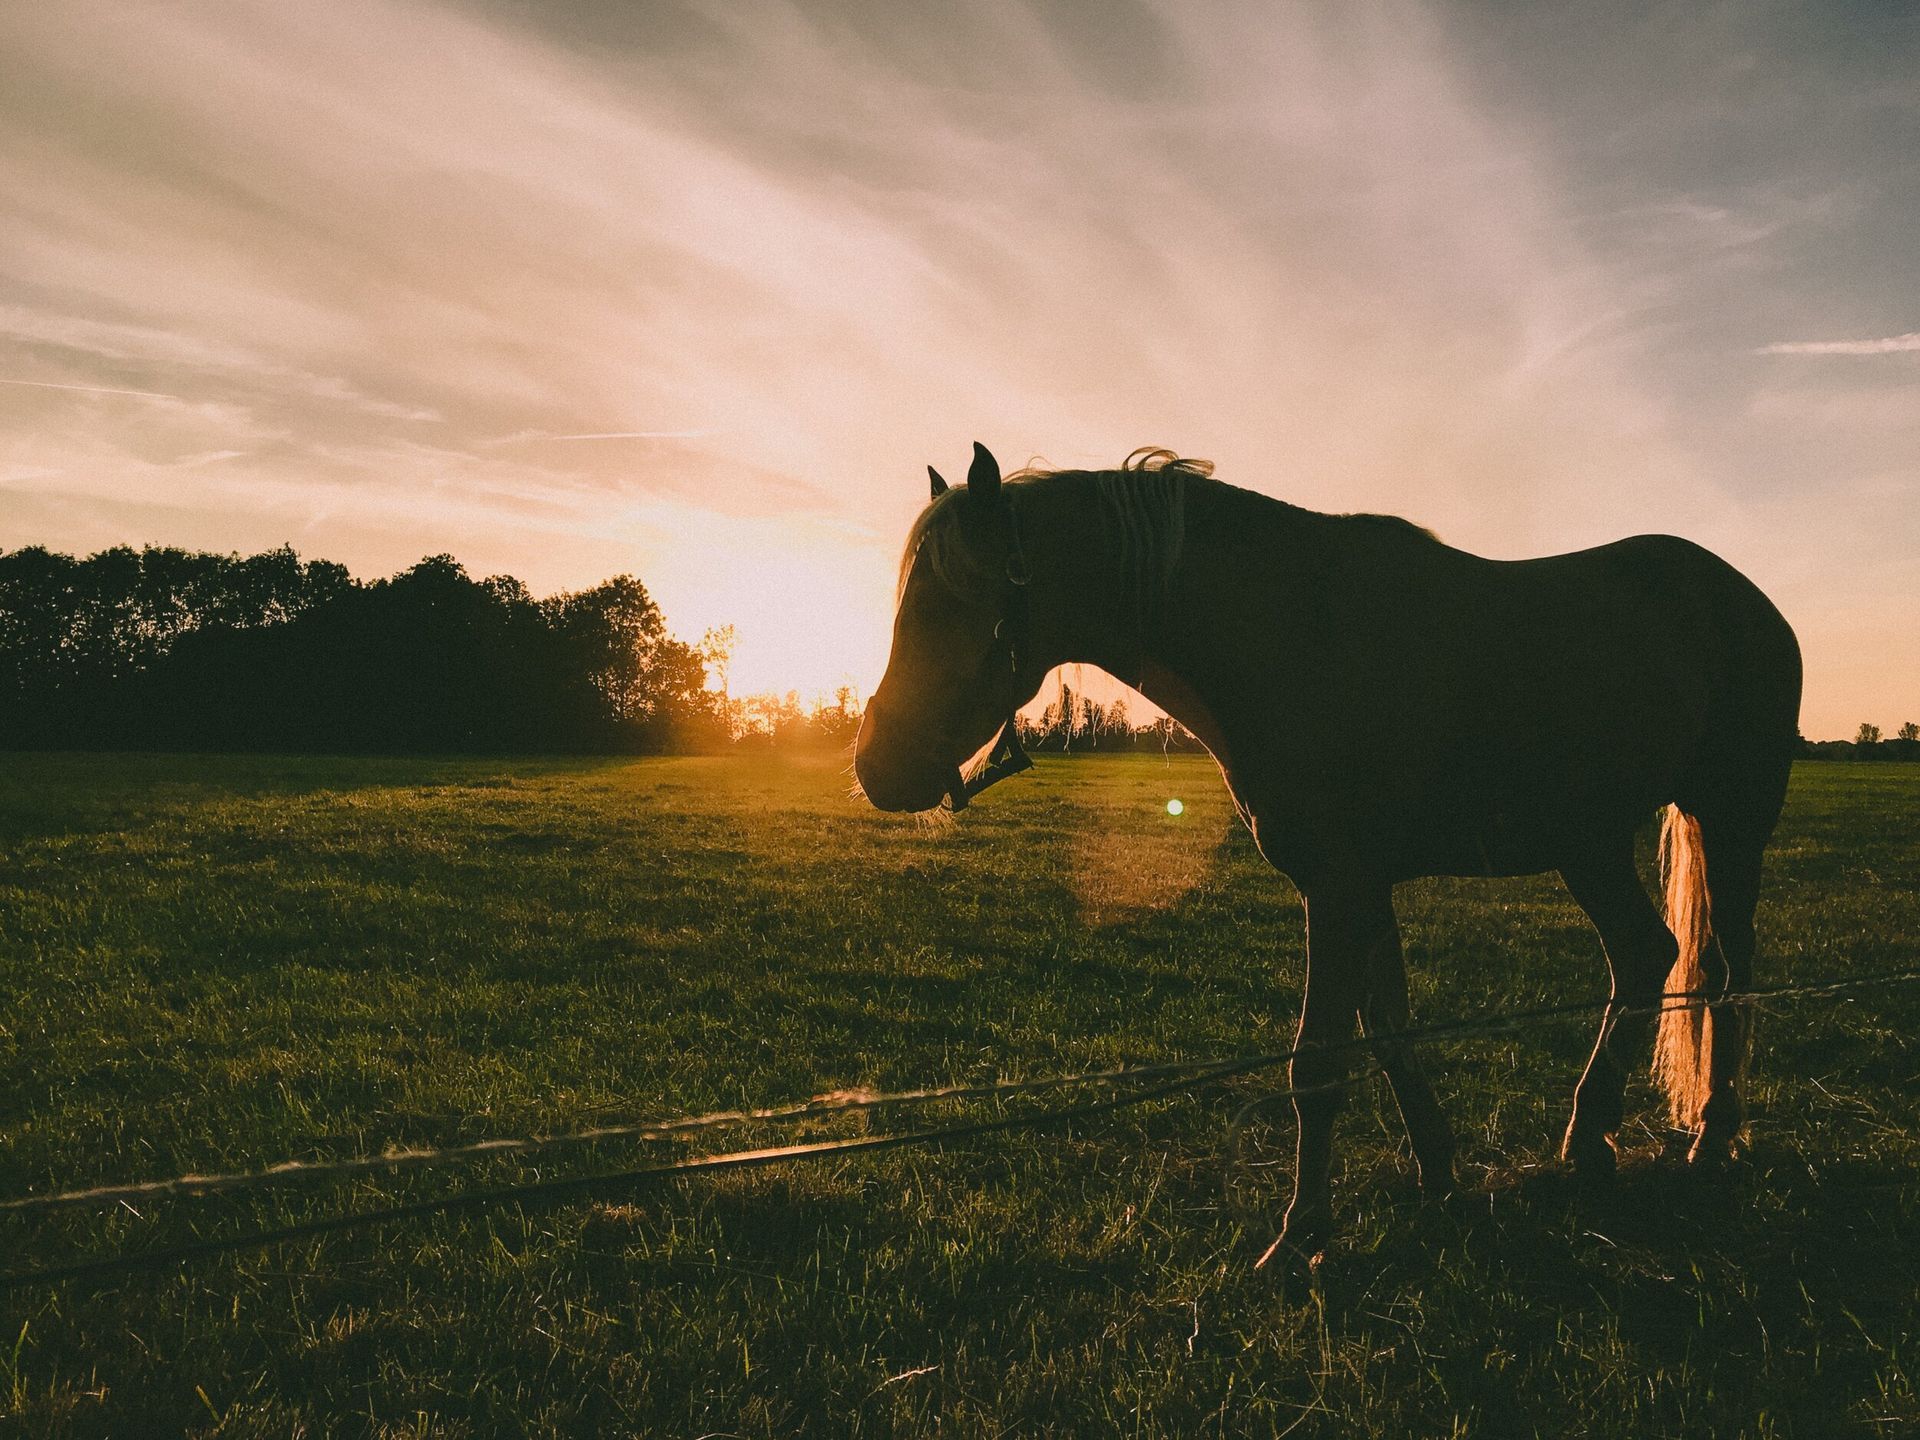 A horse standing in a grassy field at sunset